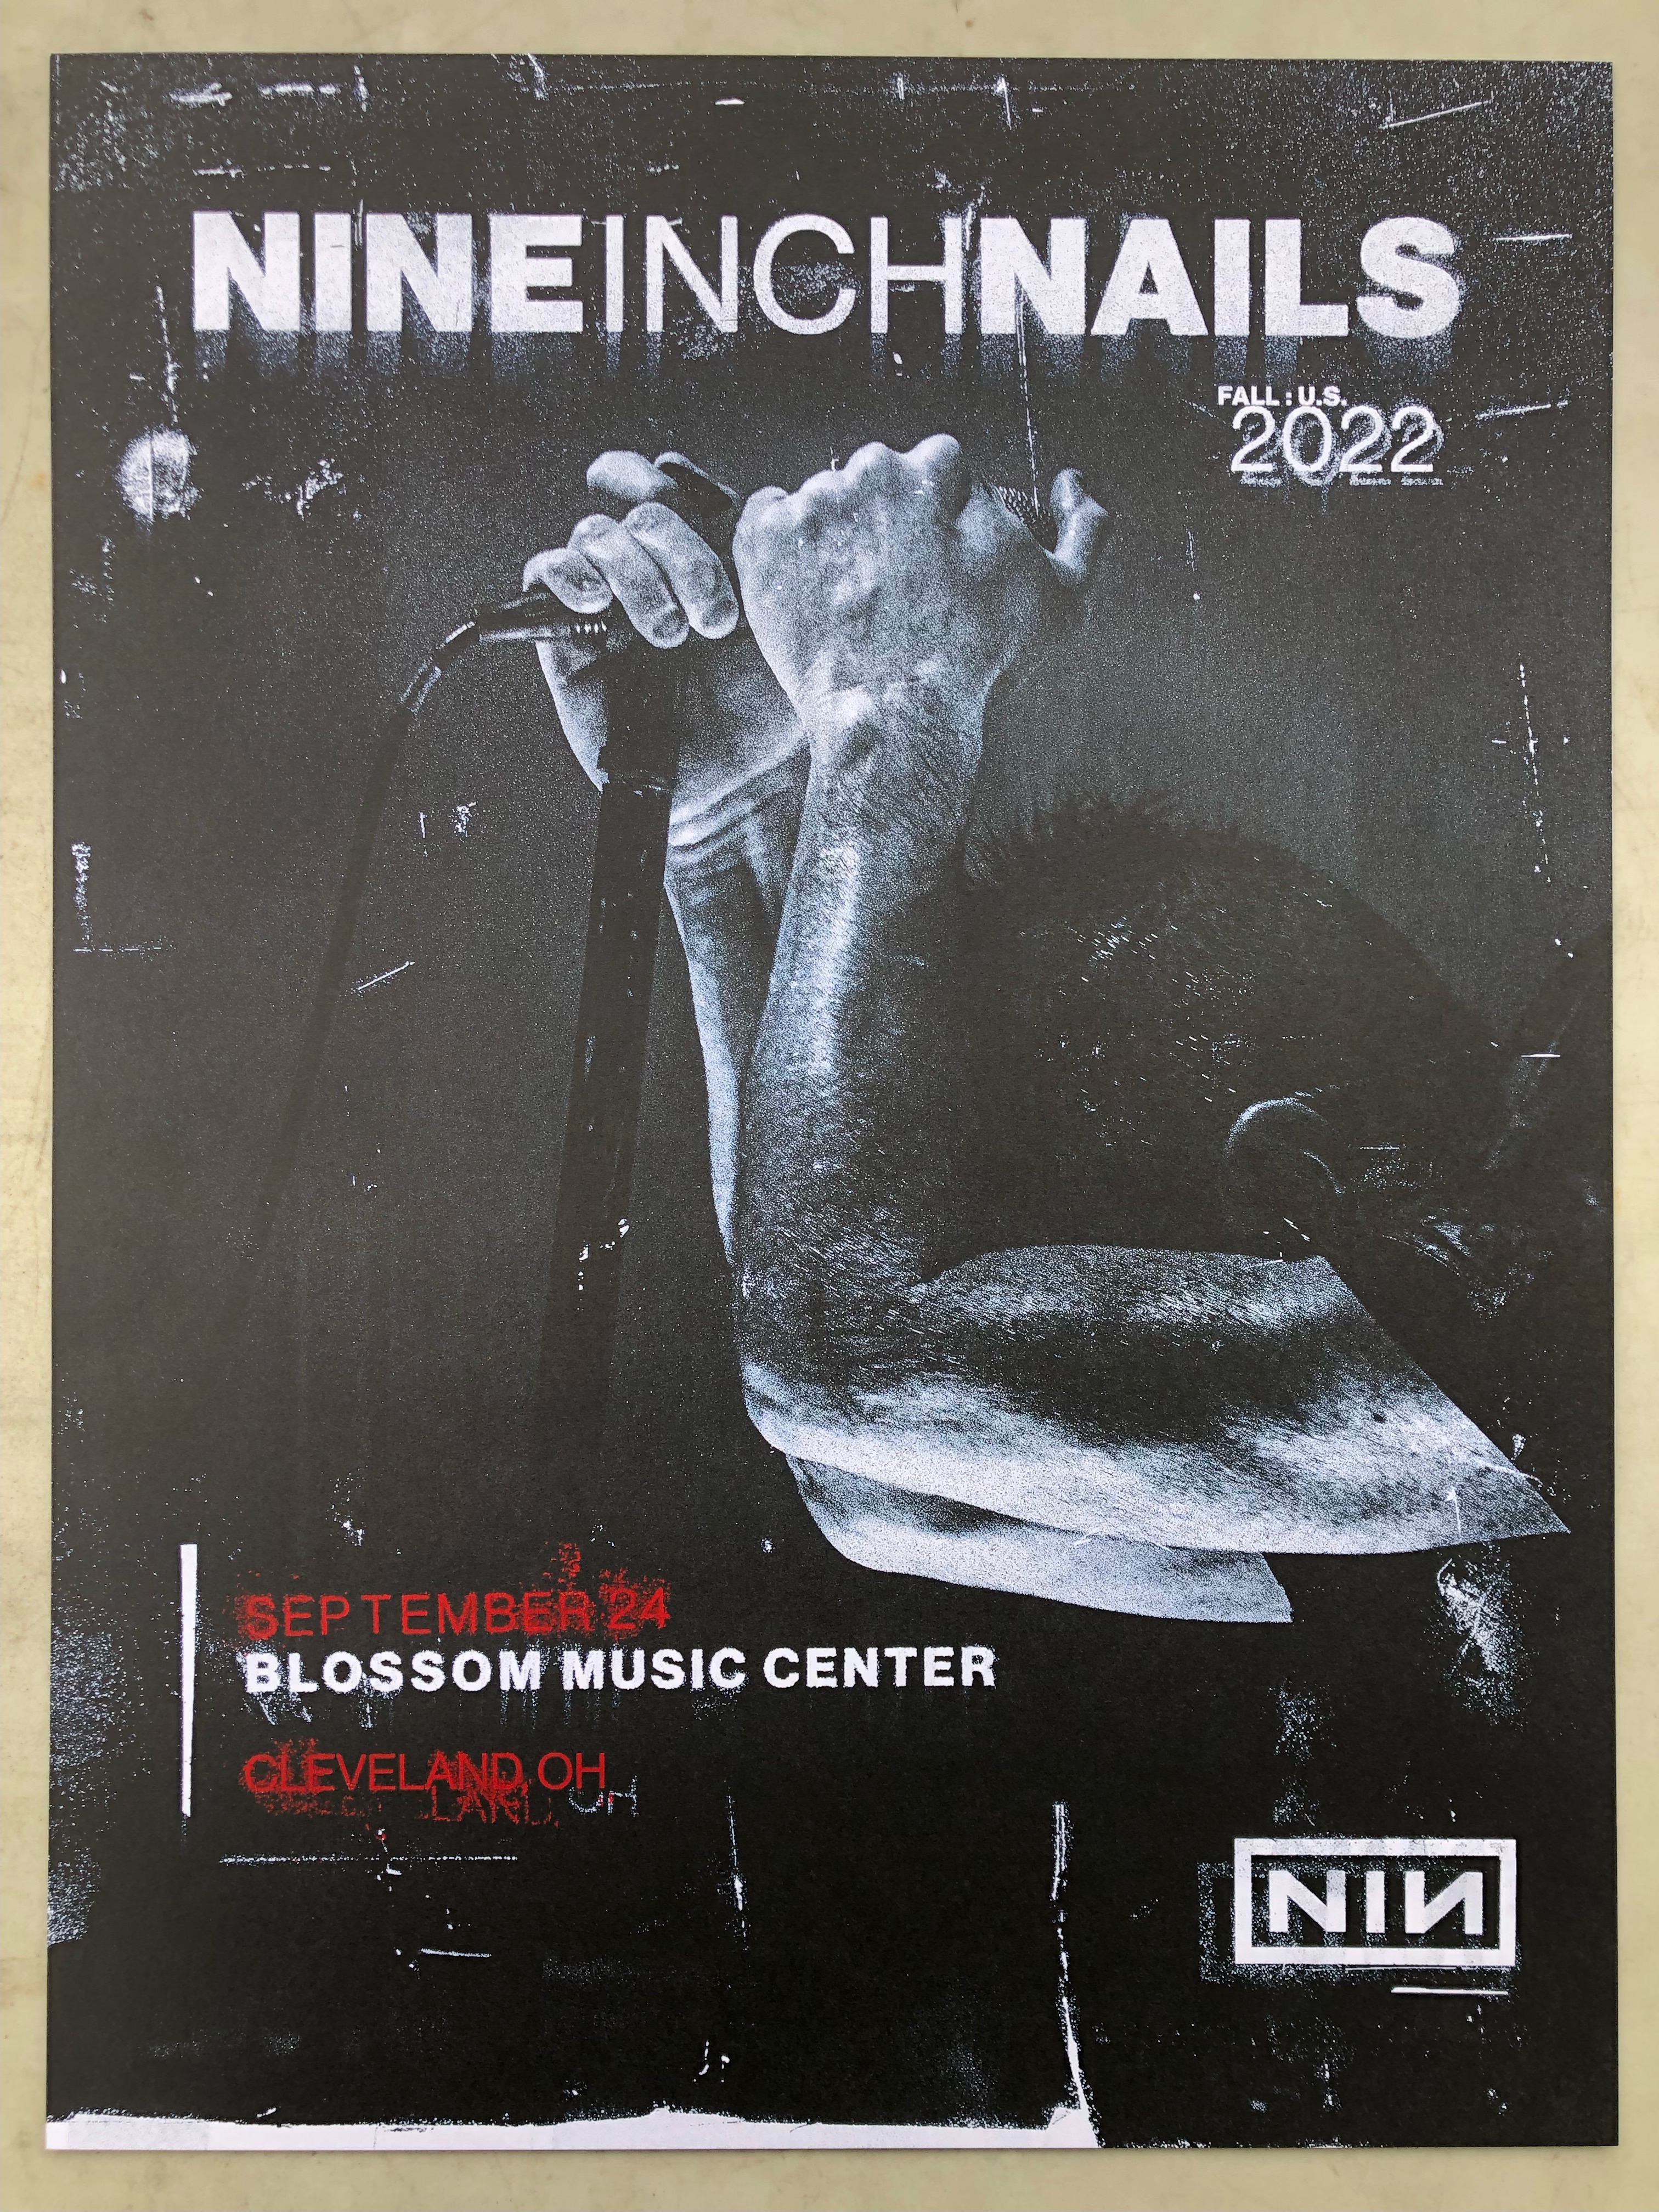 <a href='https://www.ebay.com/sch/i.html?_from=R40&_trksid=p2323012.m570.l1313&_nkw=Nine+Inch+Nails+Poster+Cuyahoga Falls&_sacat=0&mkcid=1&mkrid=711-53200-19255-0&siteid=0&campid=5336302525&customid=poster&toolid=10001&mkevt=1'>Buy this Poster!</a>